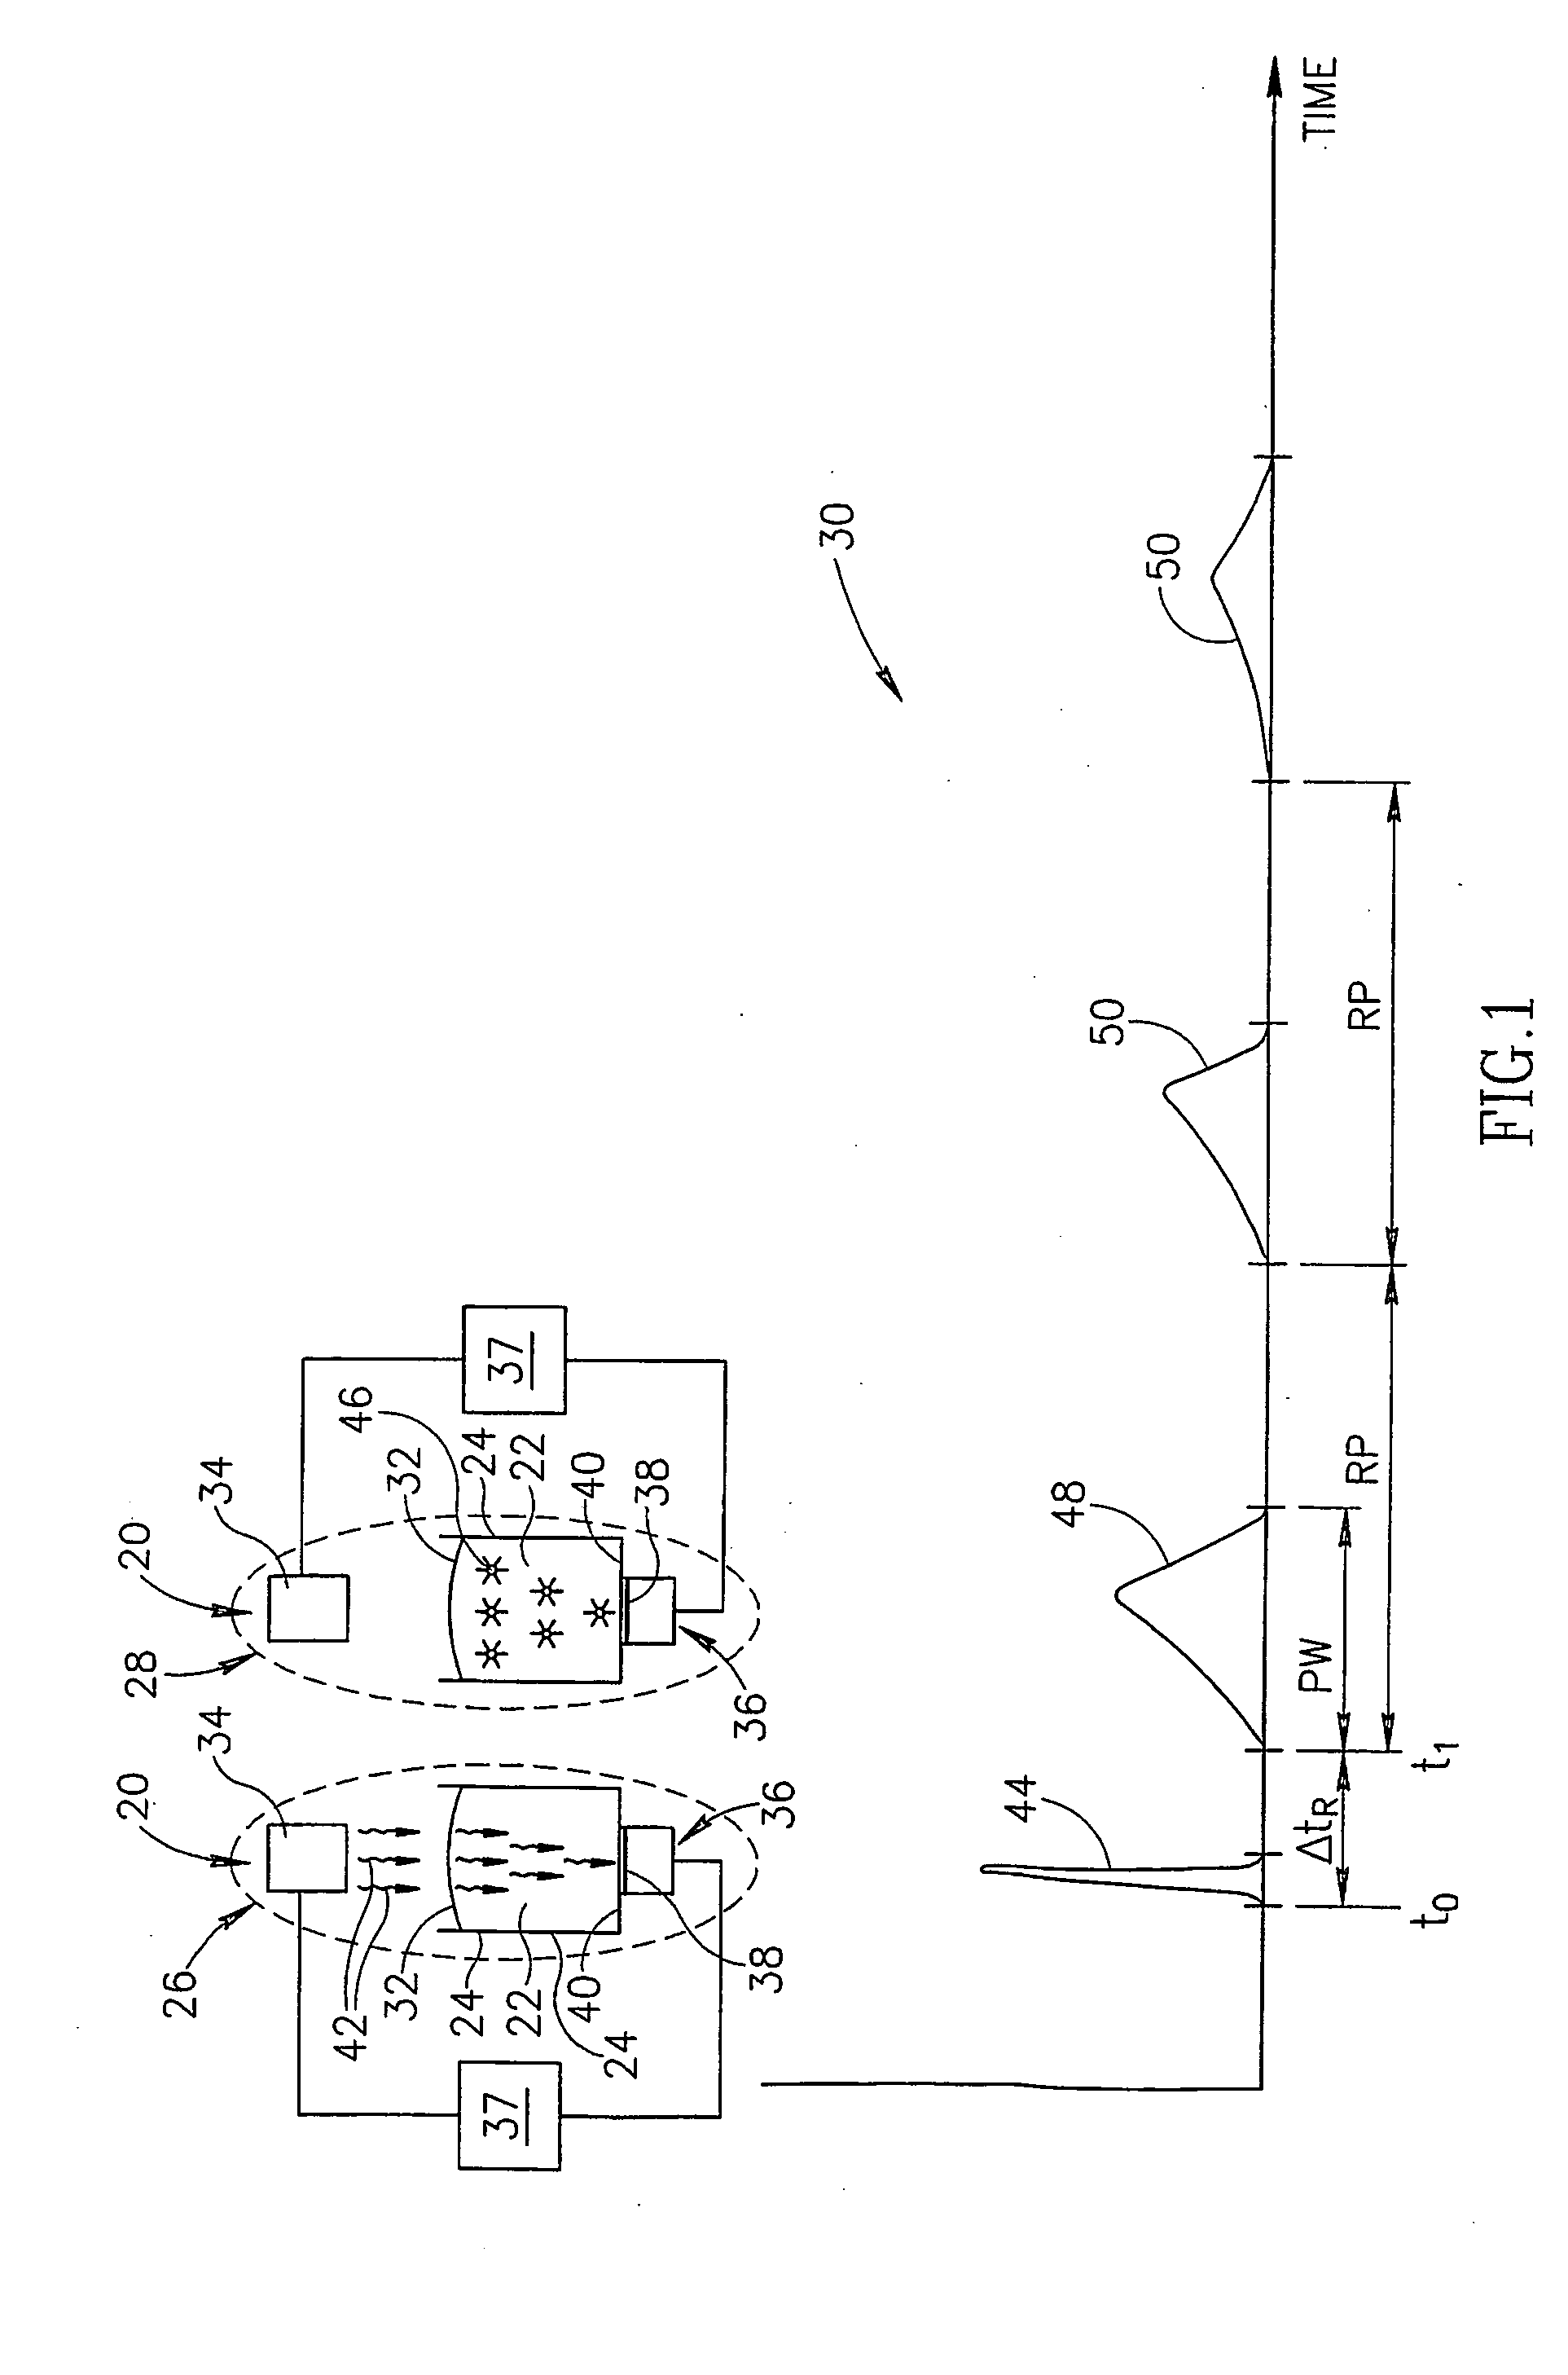 Method and apparatus for determining absorption of electromagnetic radiation by a material